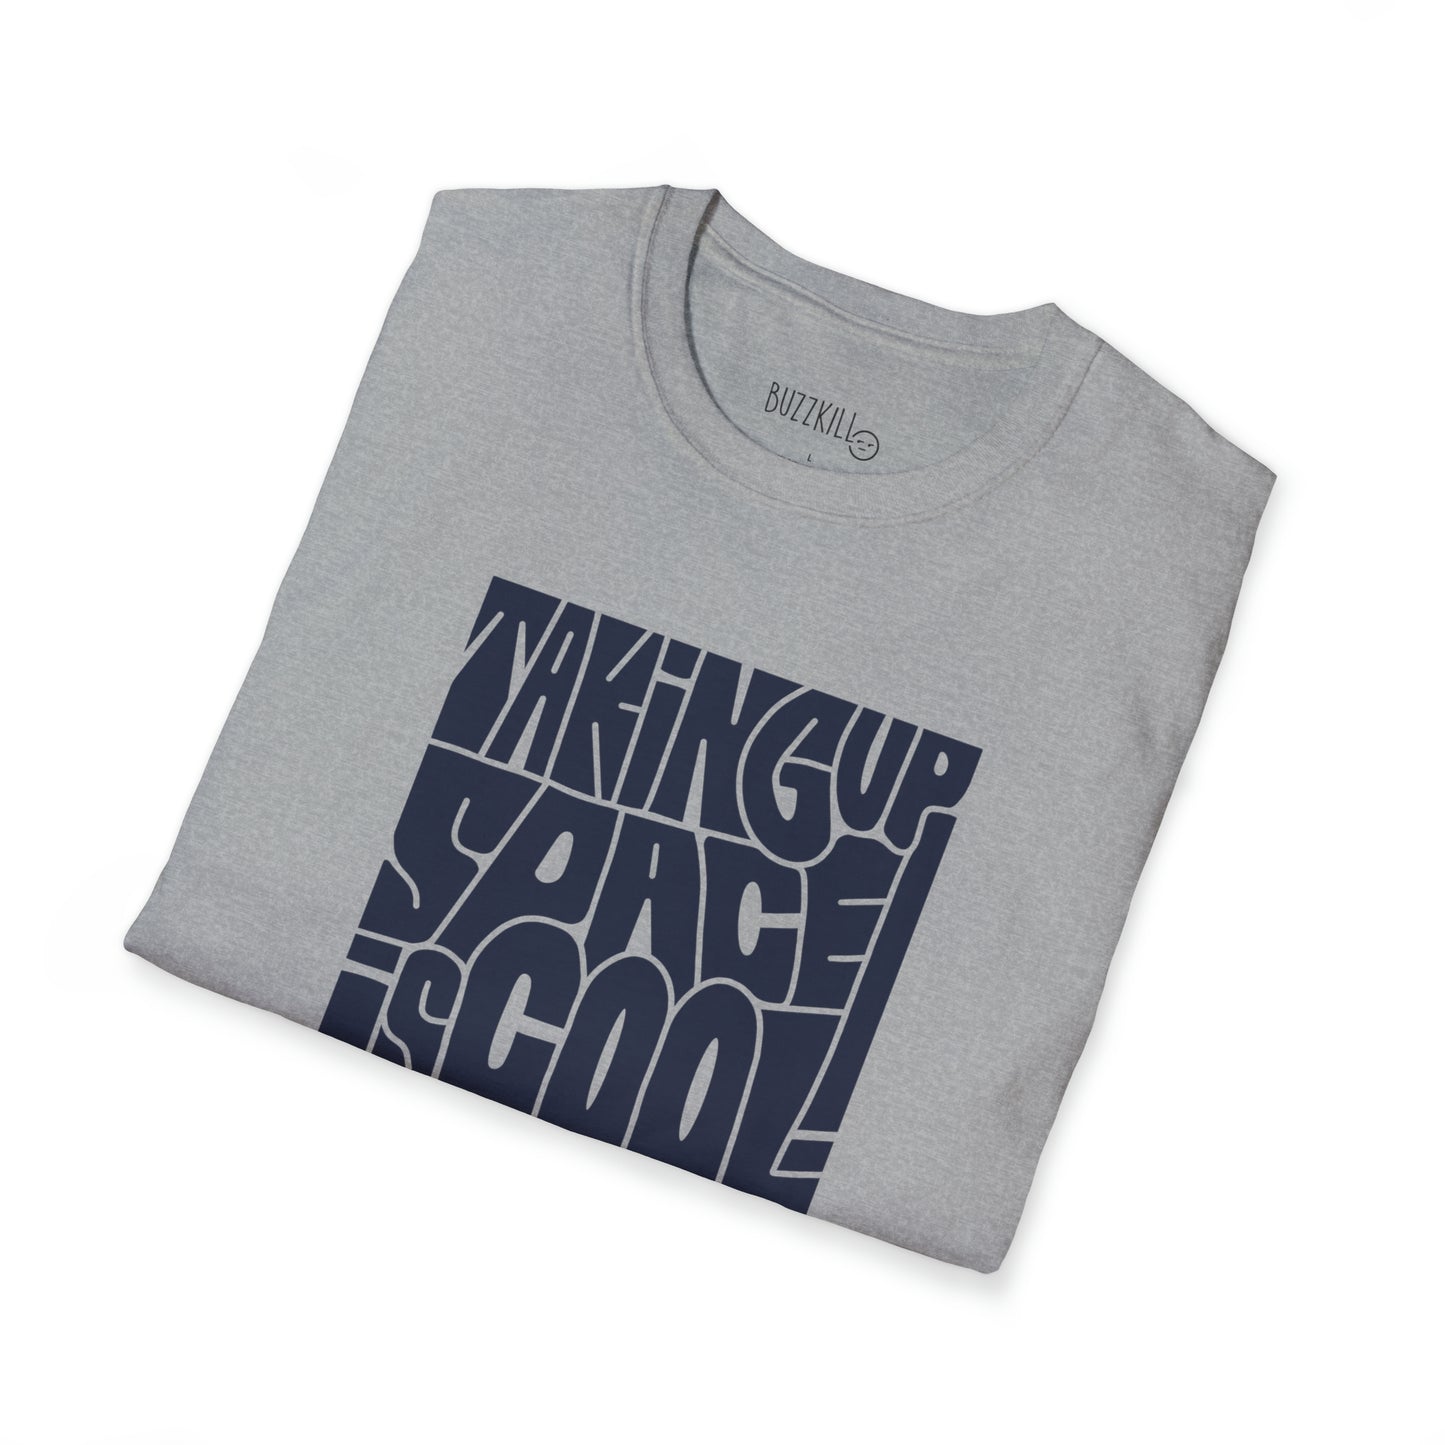 Taking Up Space Is Cool - Unisex Softstyle Tee